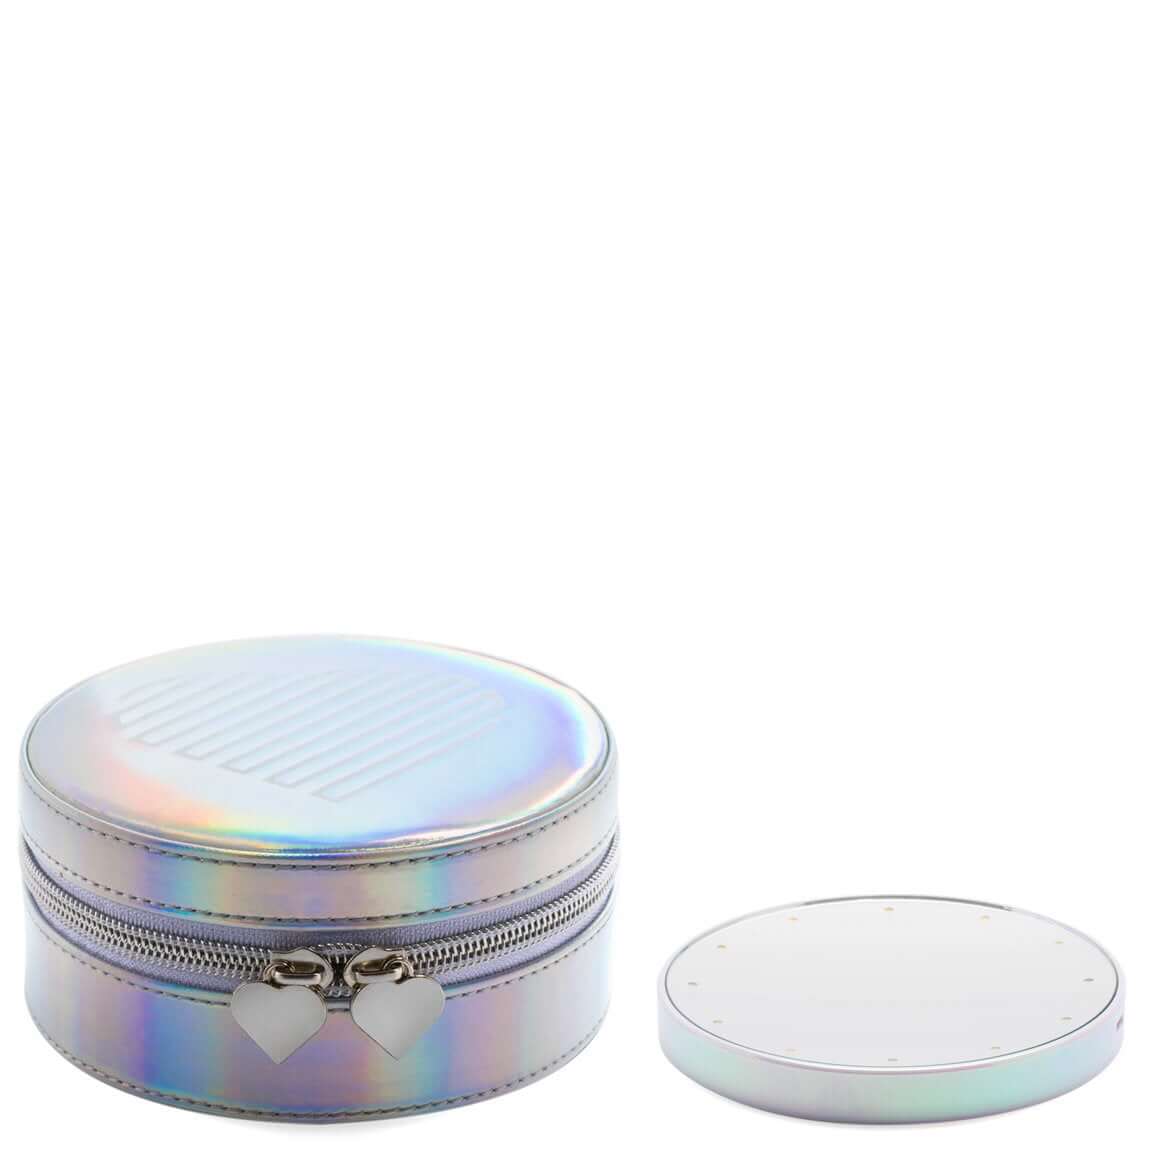 Travel in style with the RIKI SUPER FINE Magnification Mirror in Portable Iridescent